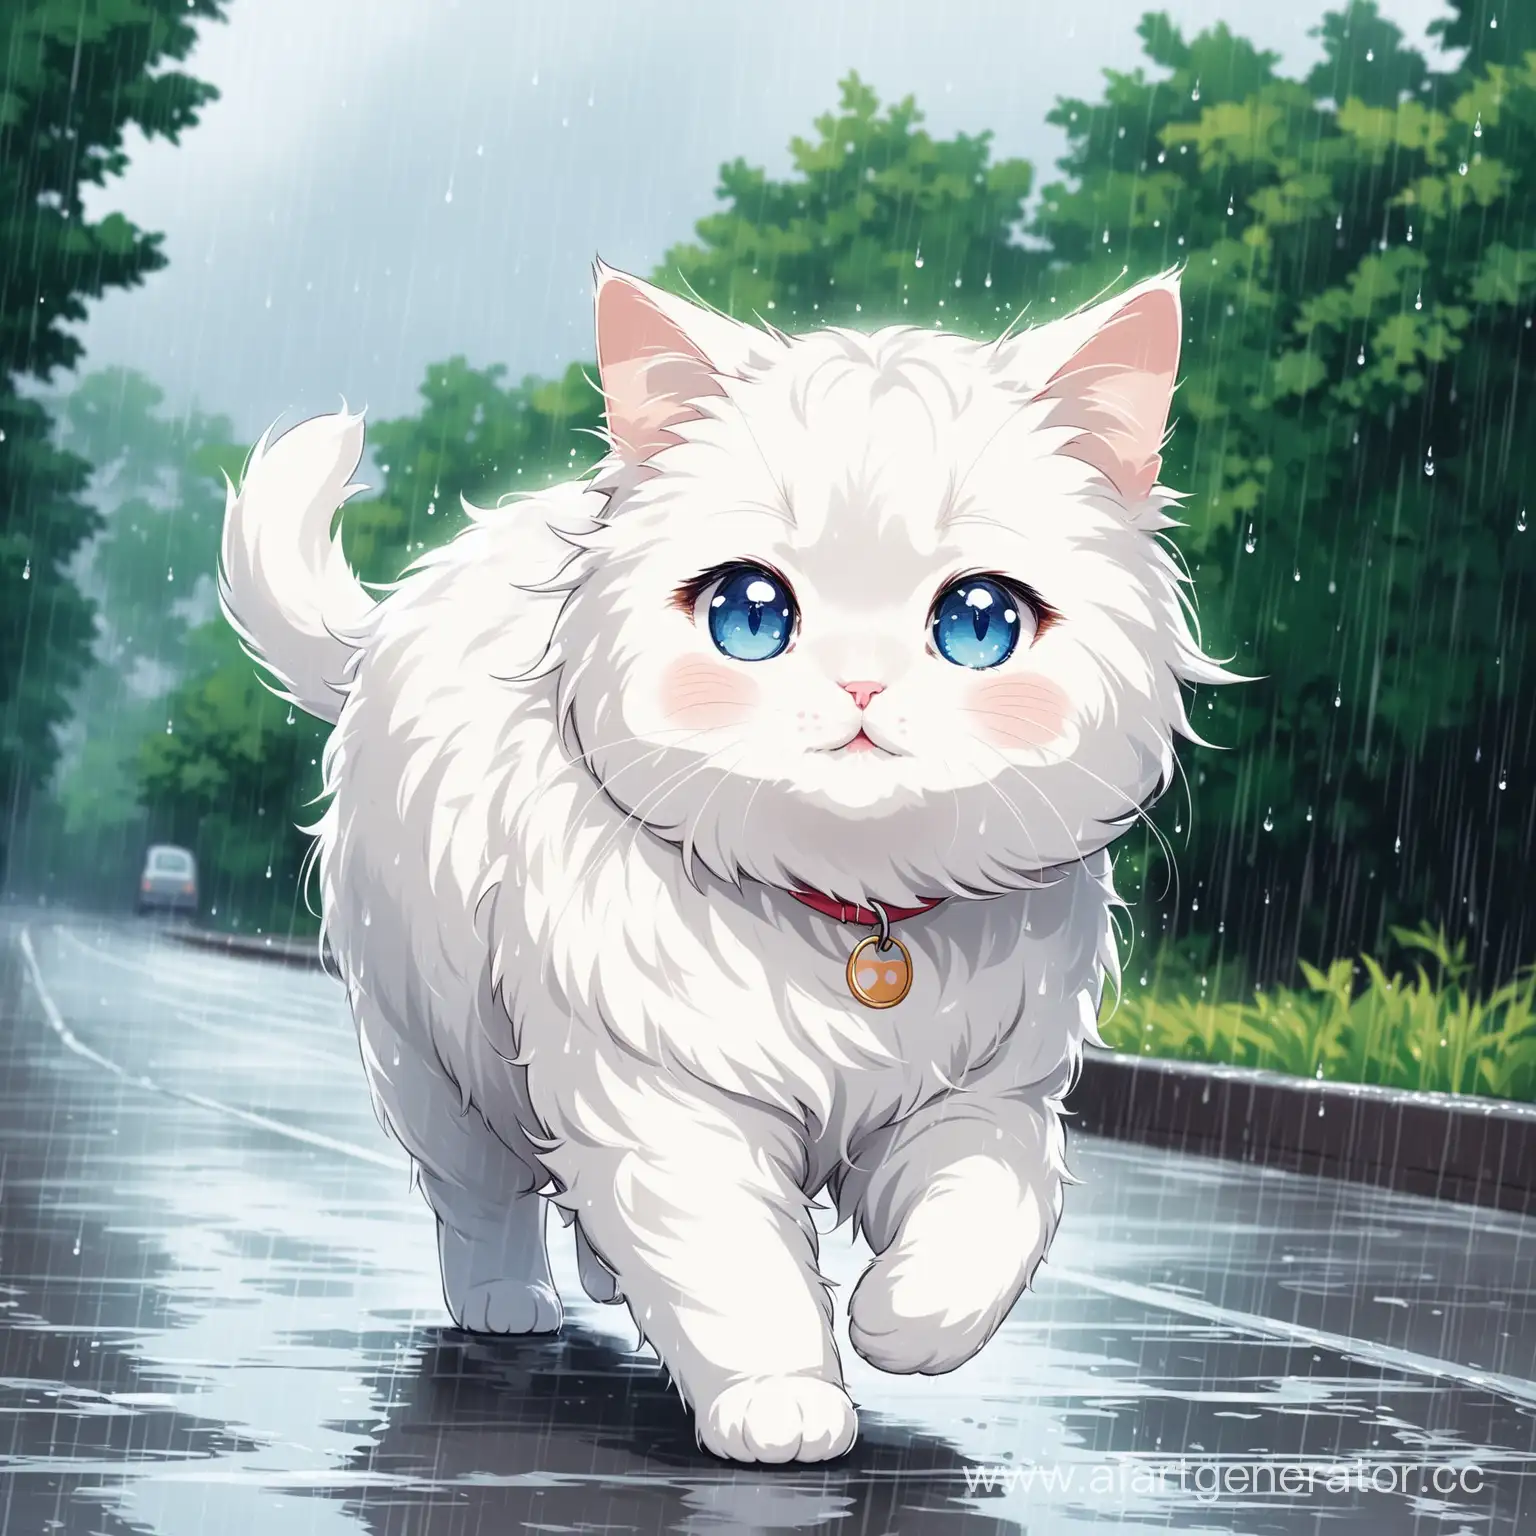 Fluffy-White-Cat-Walking-in-Rainy-Weather